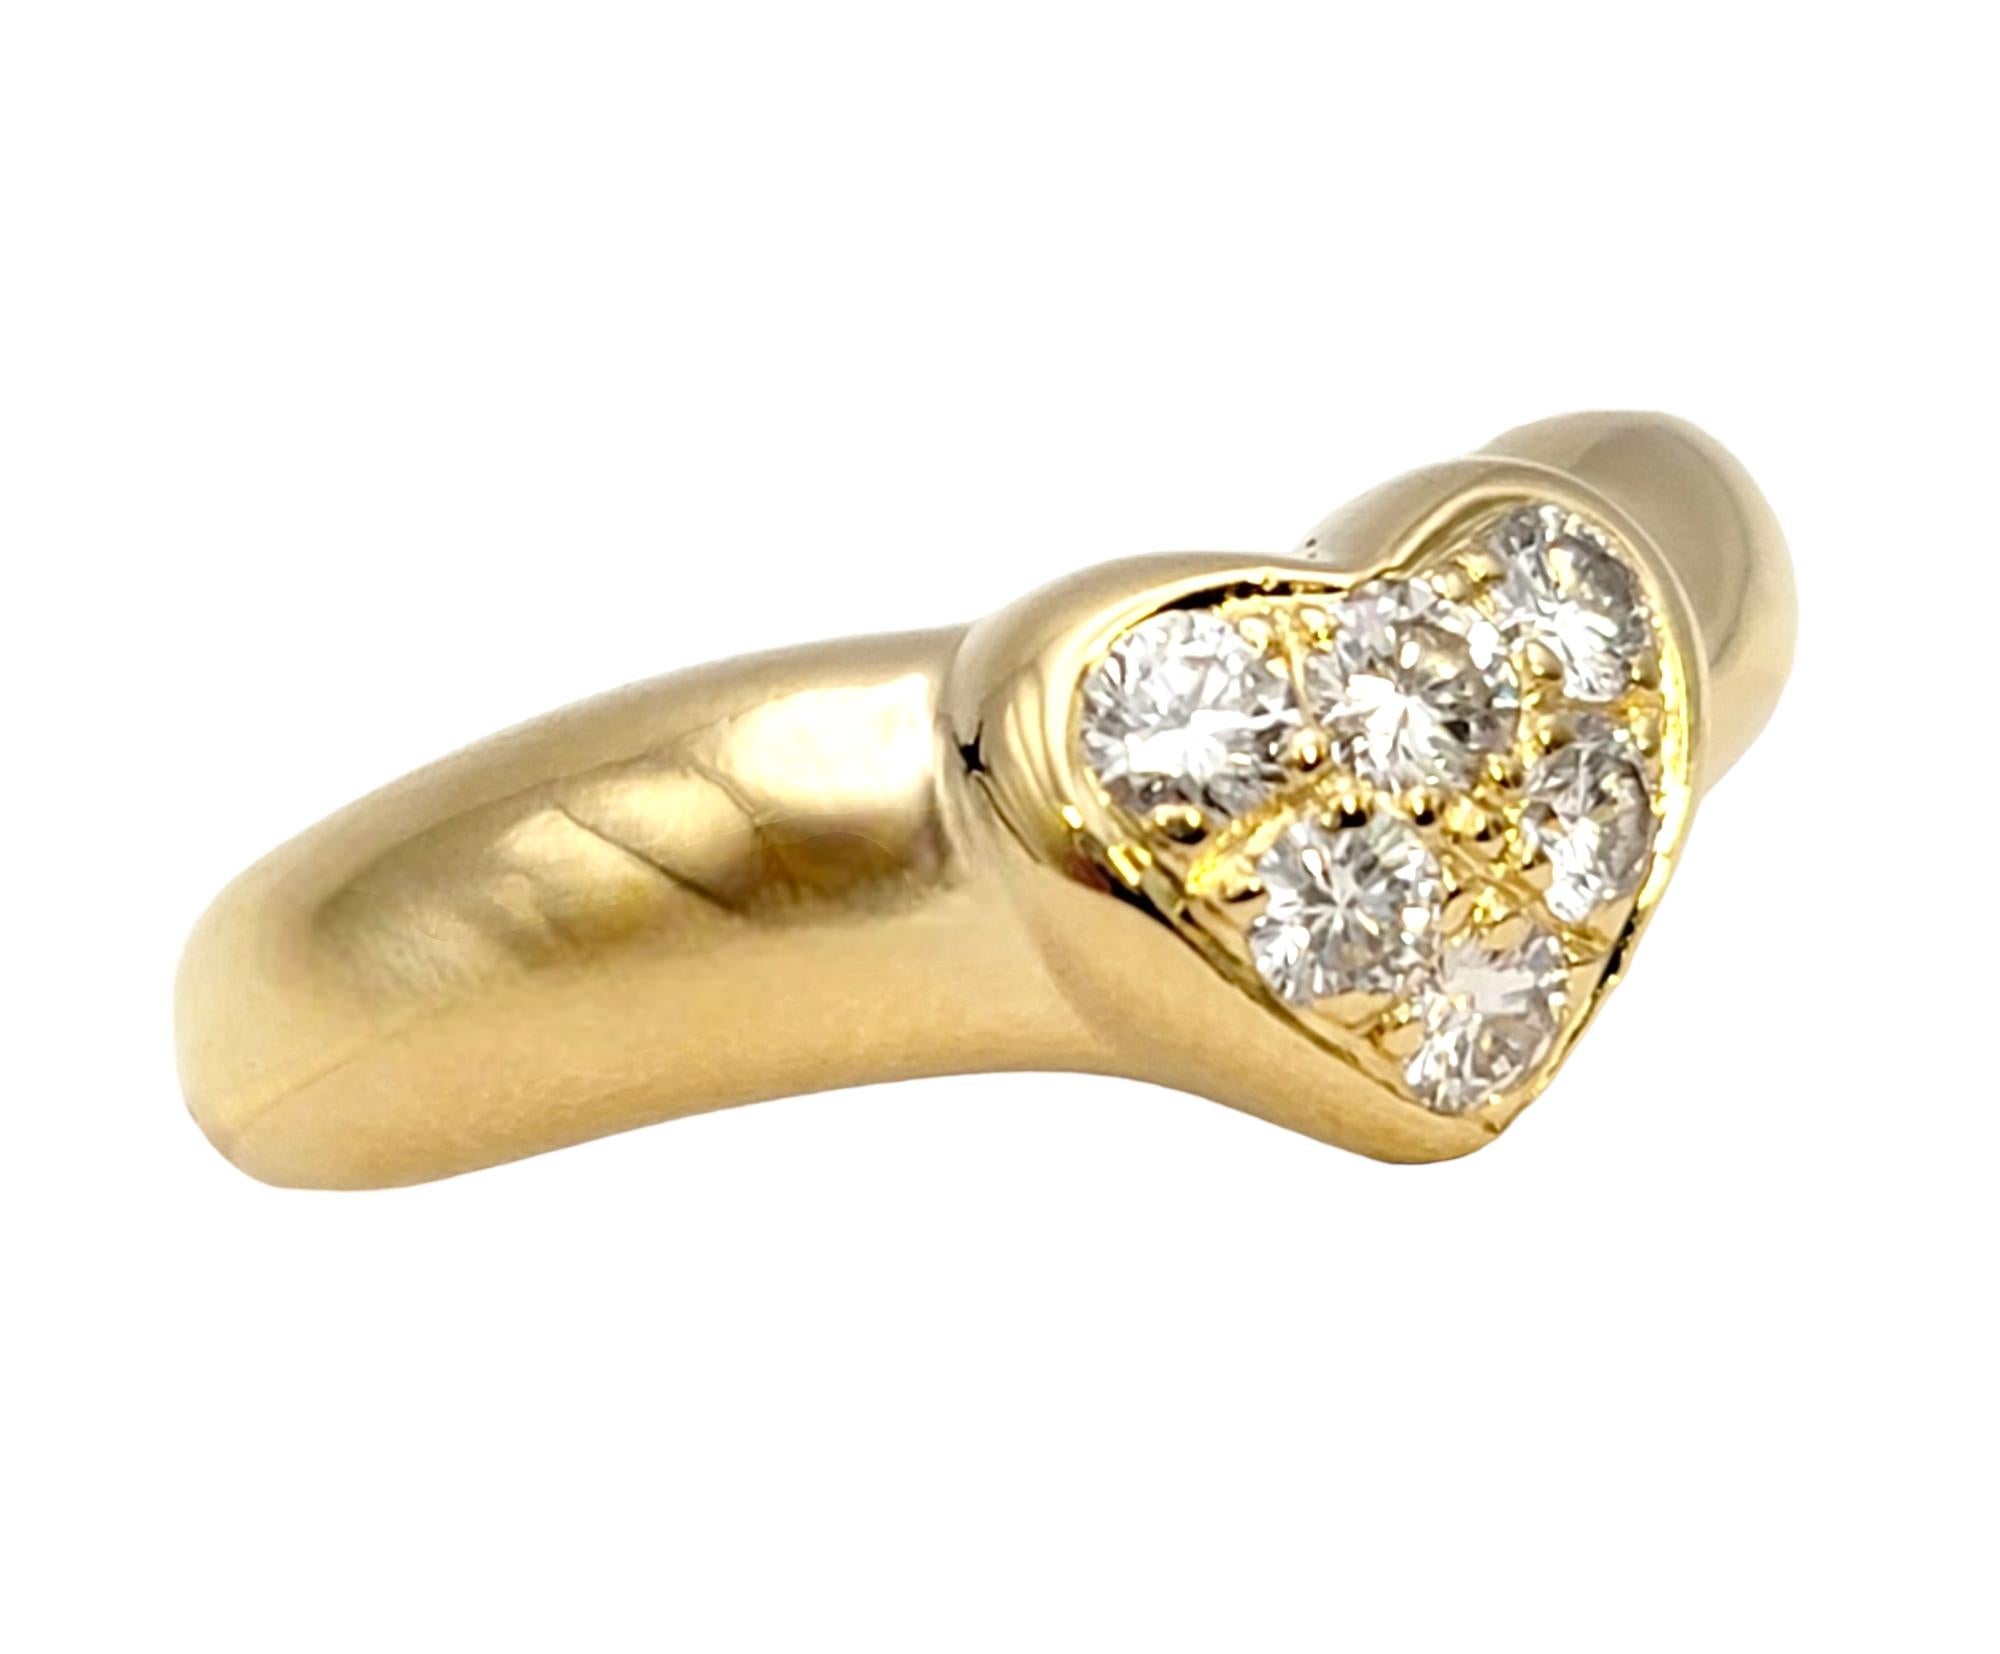 Ring size: 3.5

This lovely retired Etoile diamond band ring by Tiffany & Co. absolutely shines on the finger. Founded in 1837 in New York City, Tiffany & Co. is one of the world's most storied luxury design houses recognized globally for its